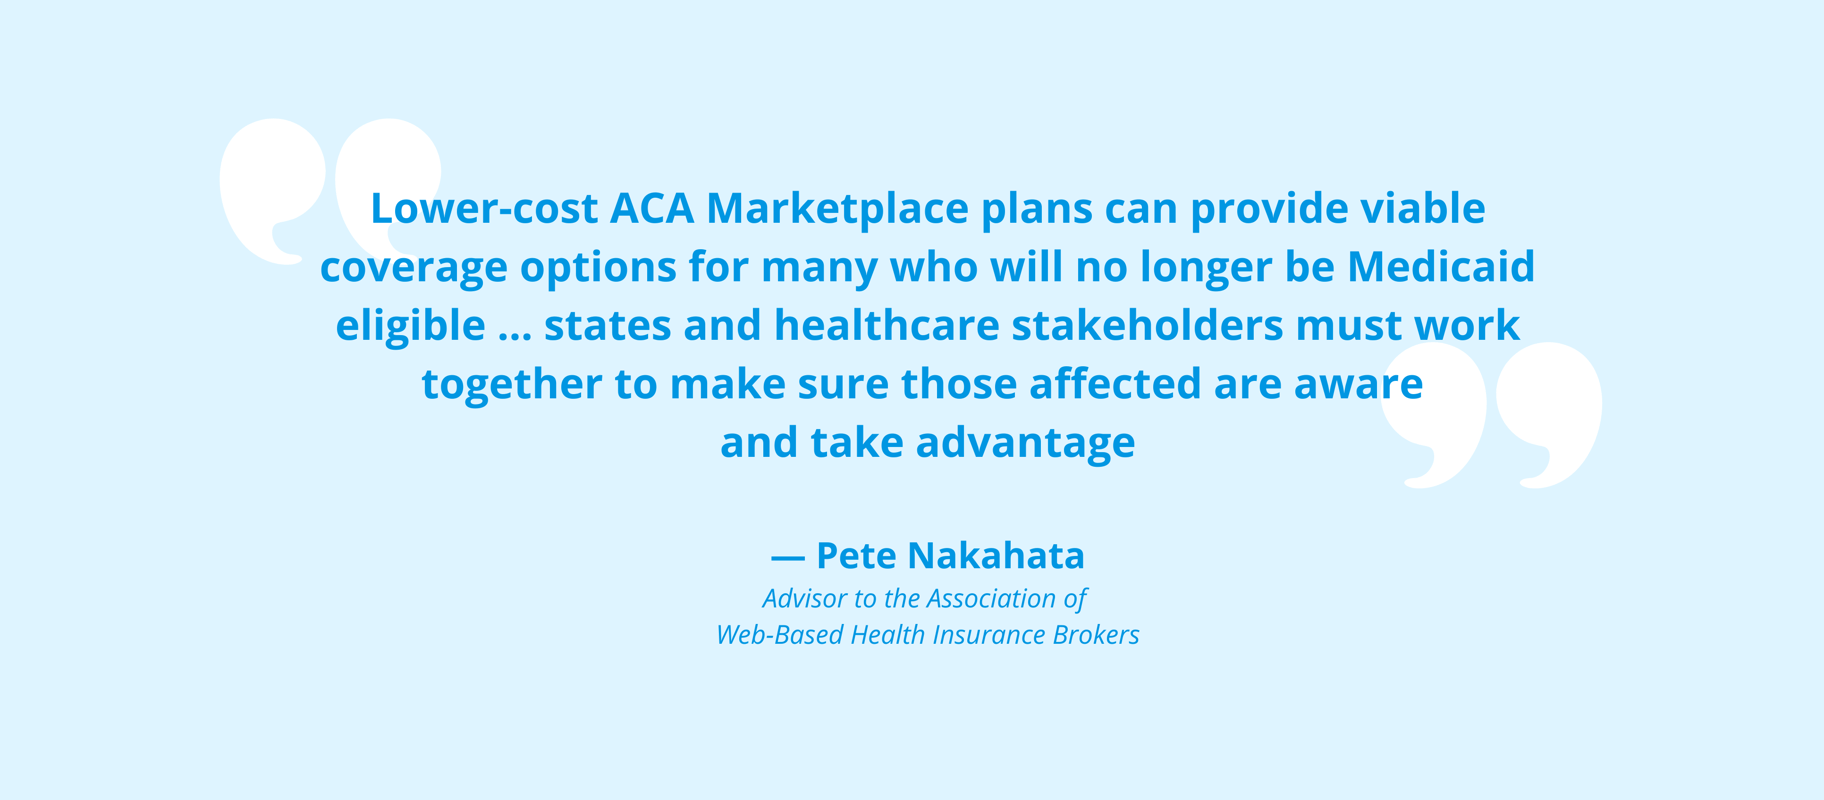 Lower-cost ACA Marketplace plans can provide viable coverage options for many who will no longer be Medicaid eligible ... states and healthcare stakeholders must work together to make sure those affected are aware and  (1)